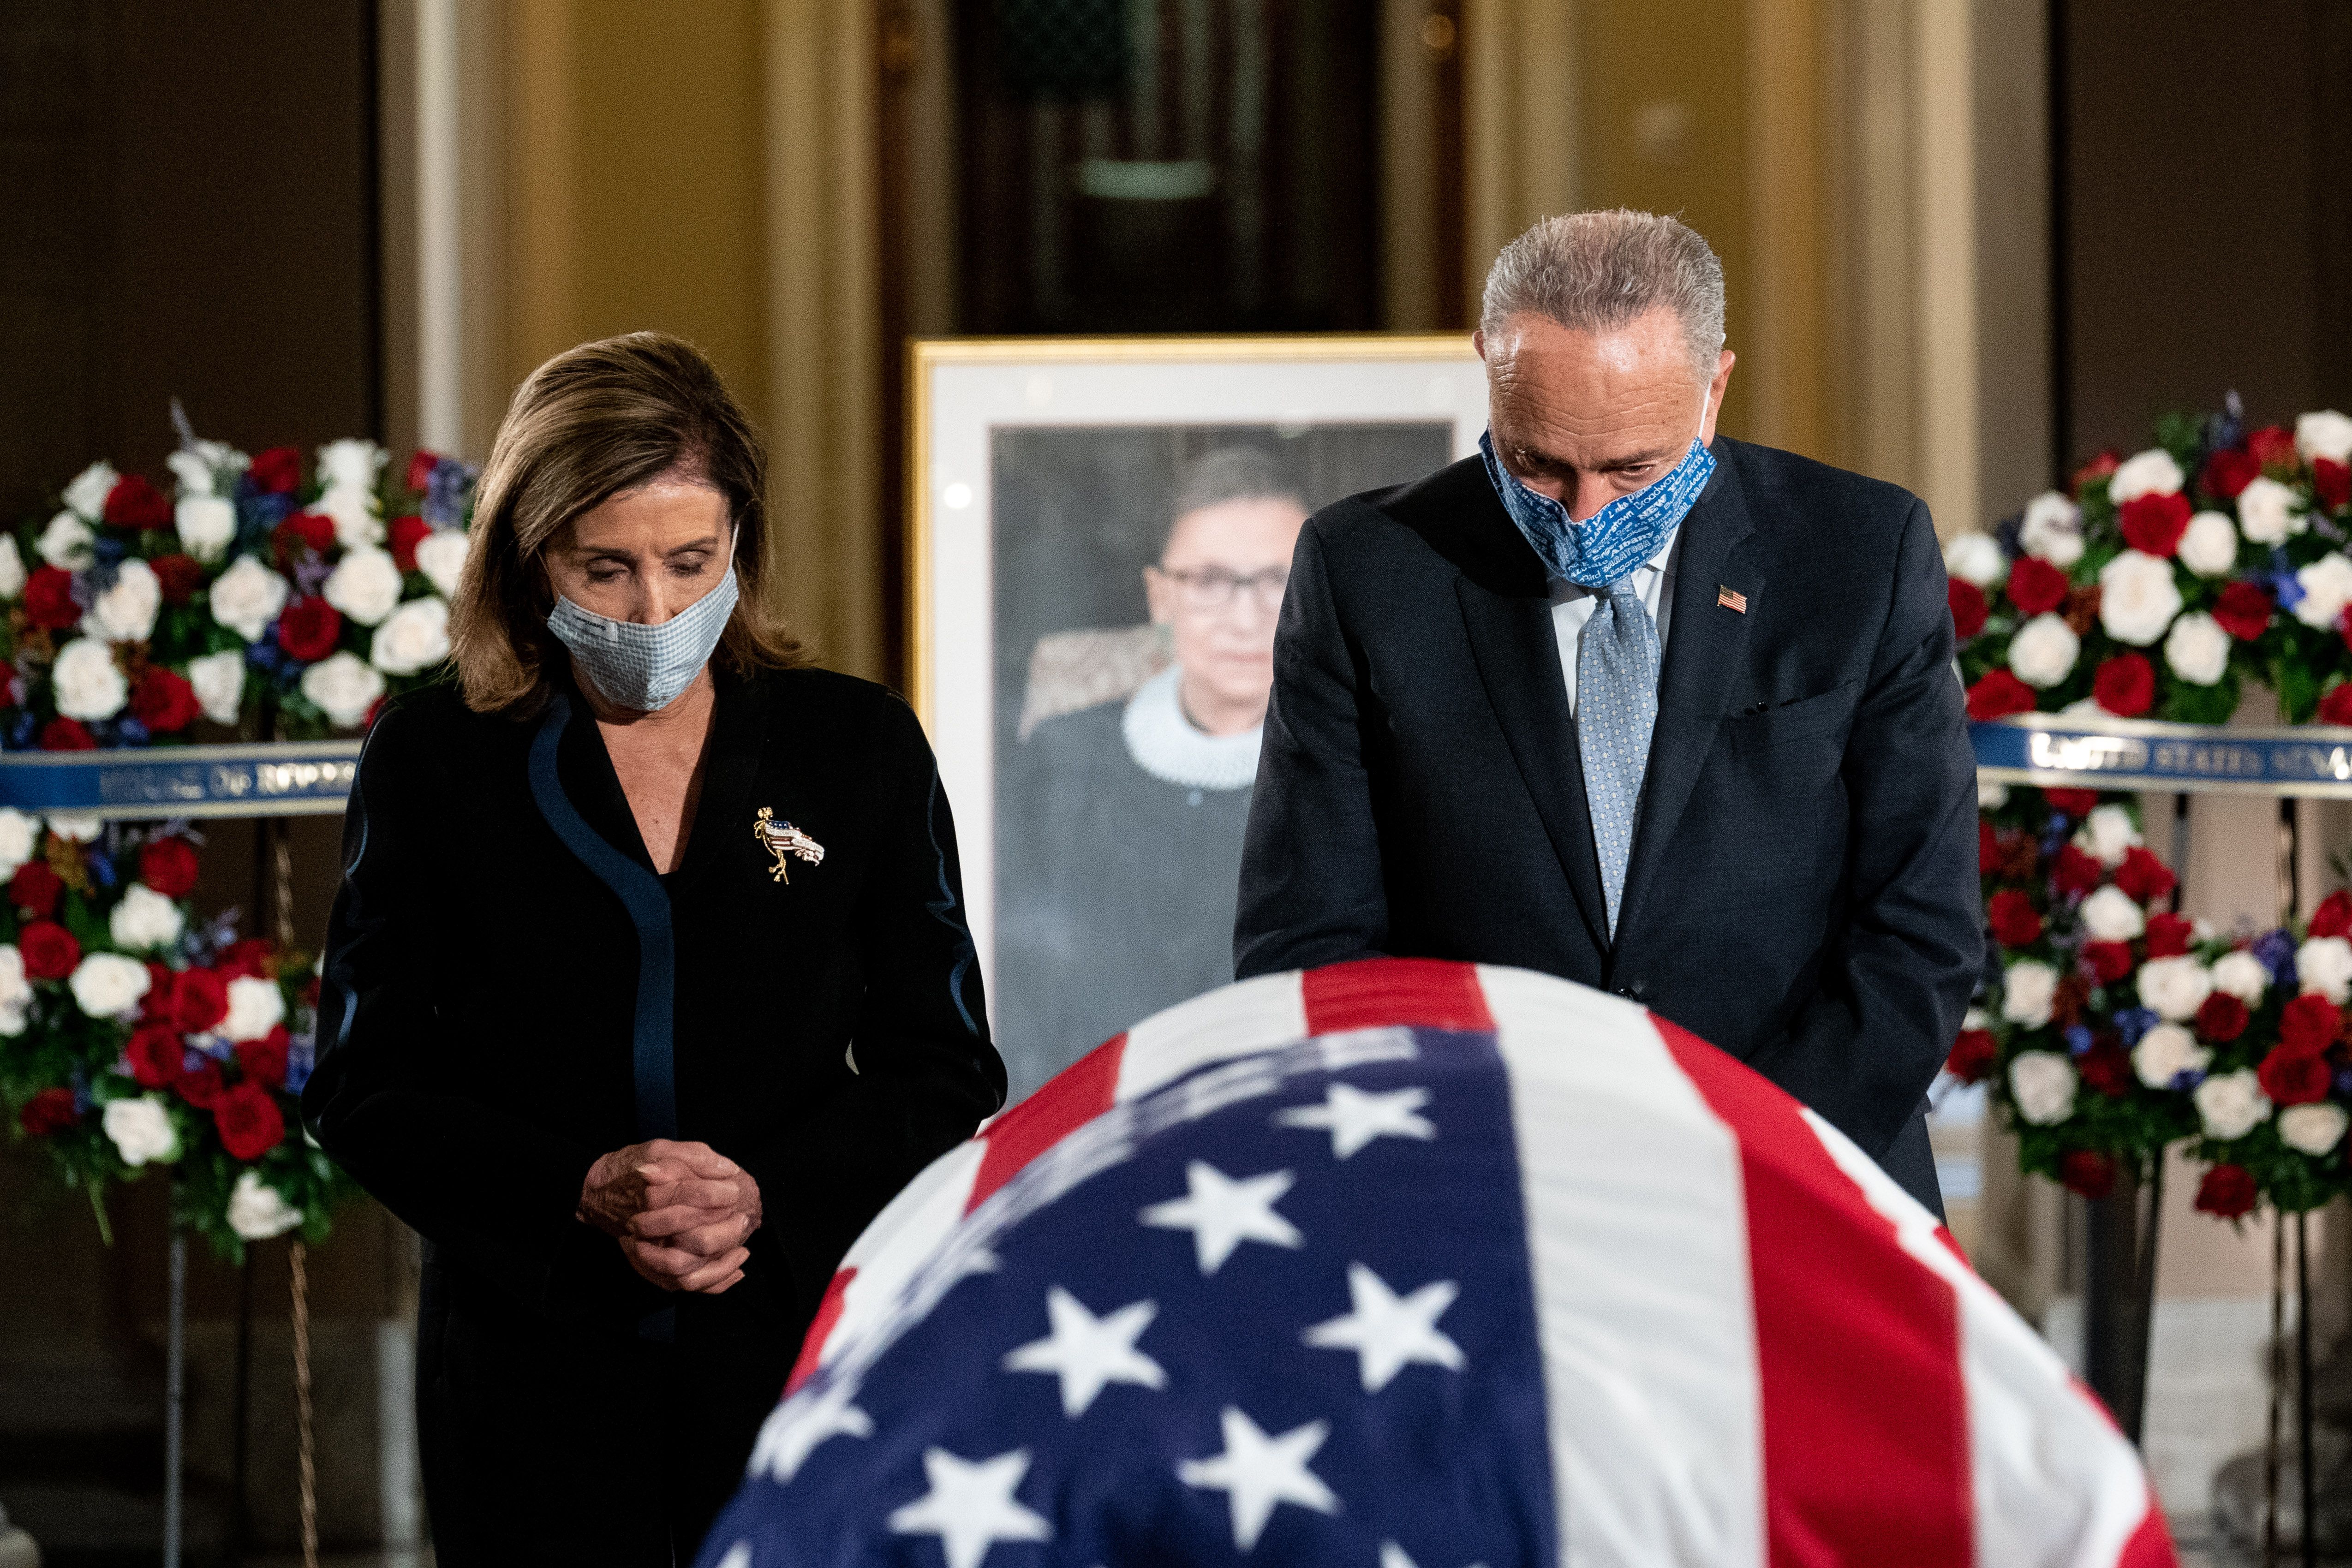 House Speaker Nancy Pelosi (D-Calif.) and Senate Minority Leader Chuck Schumer (D-N.Y.) pay their respects. Photo: Erin Schaff-Pool/Getty Images